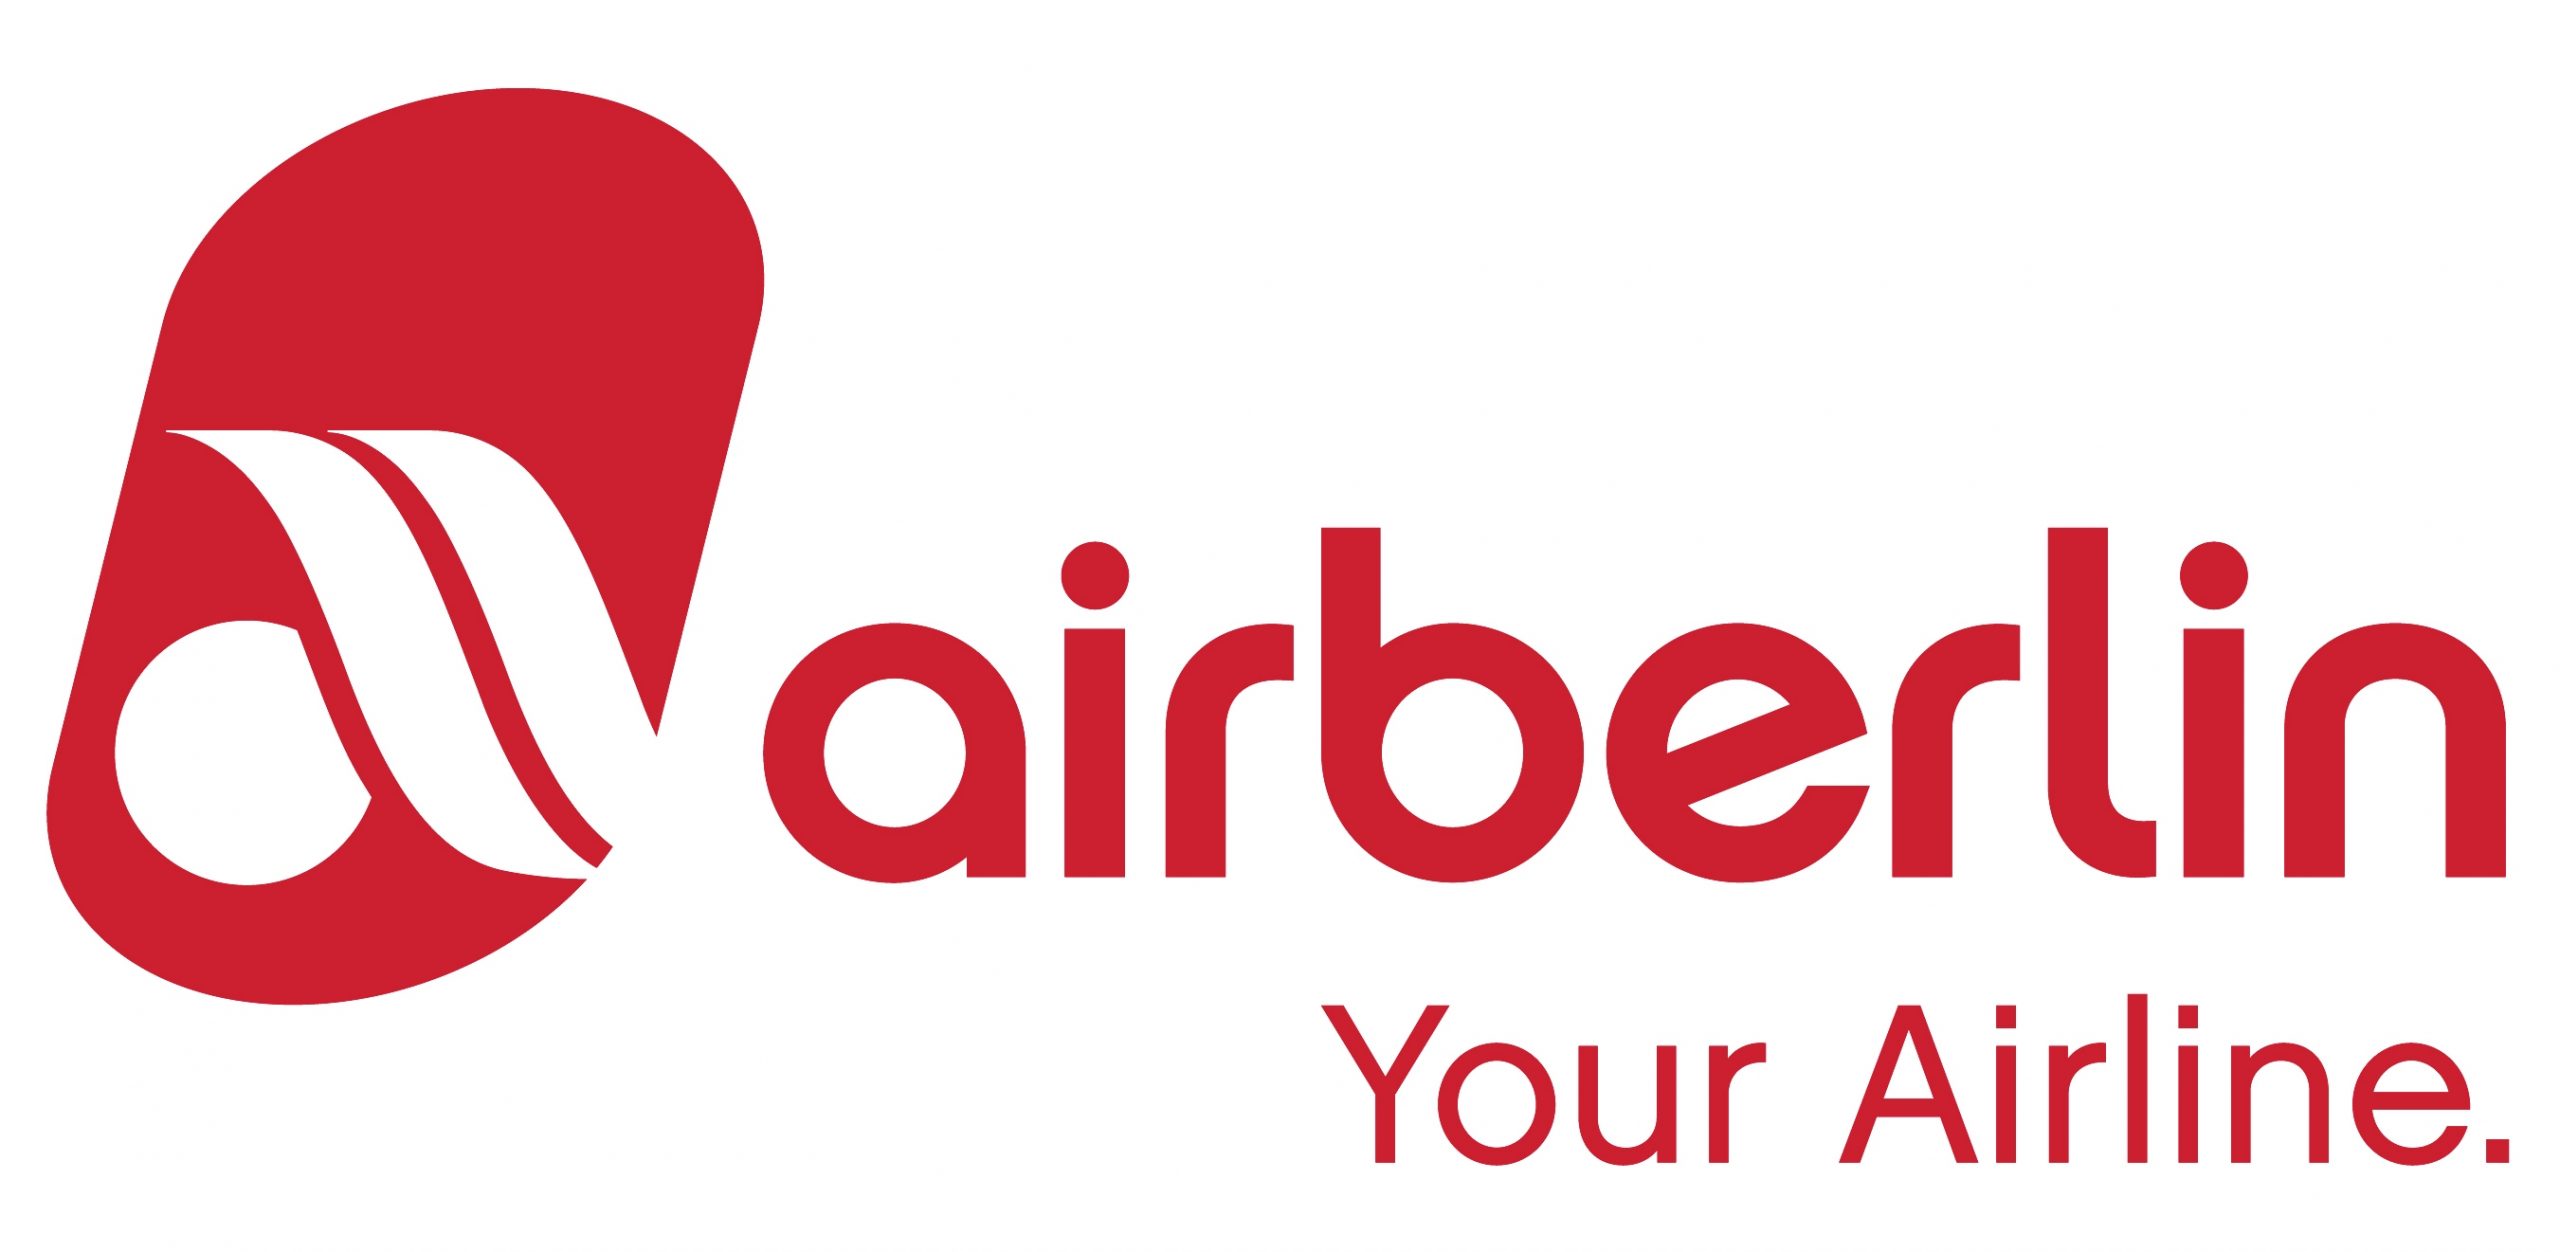 The European Court of Justice approved acquisition of the Air Berlin active assets by Lufthansa and EasyJet companies